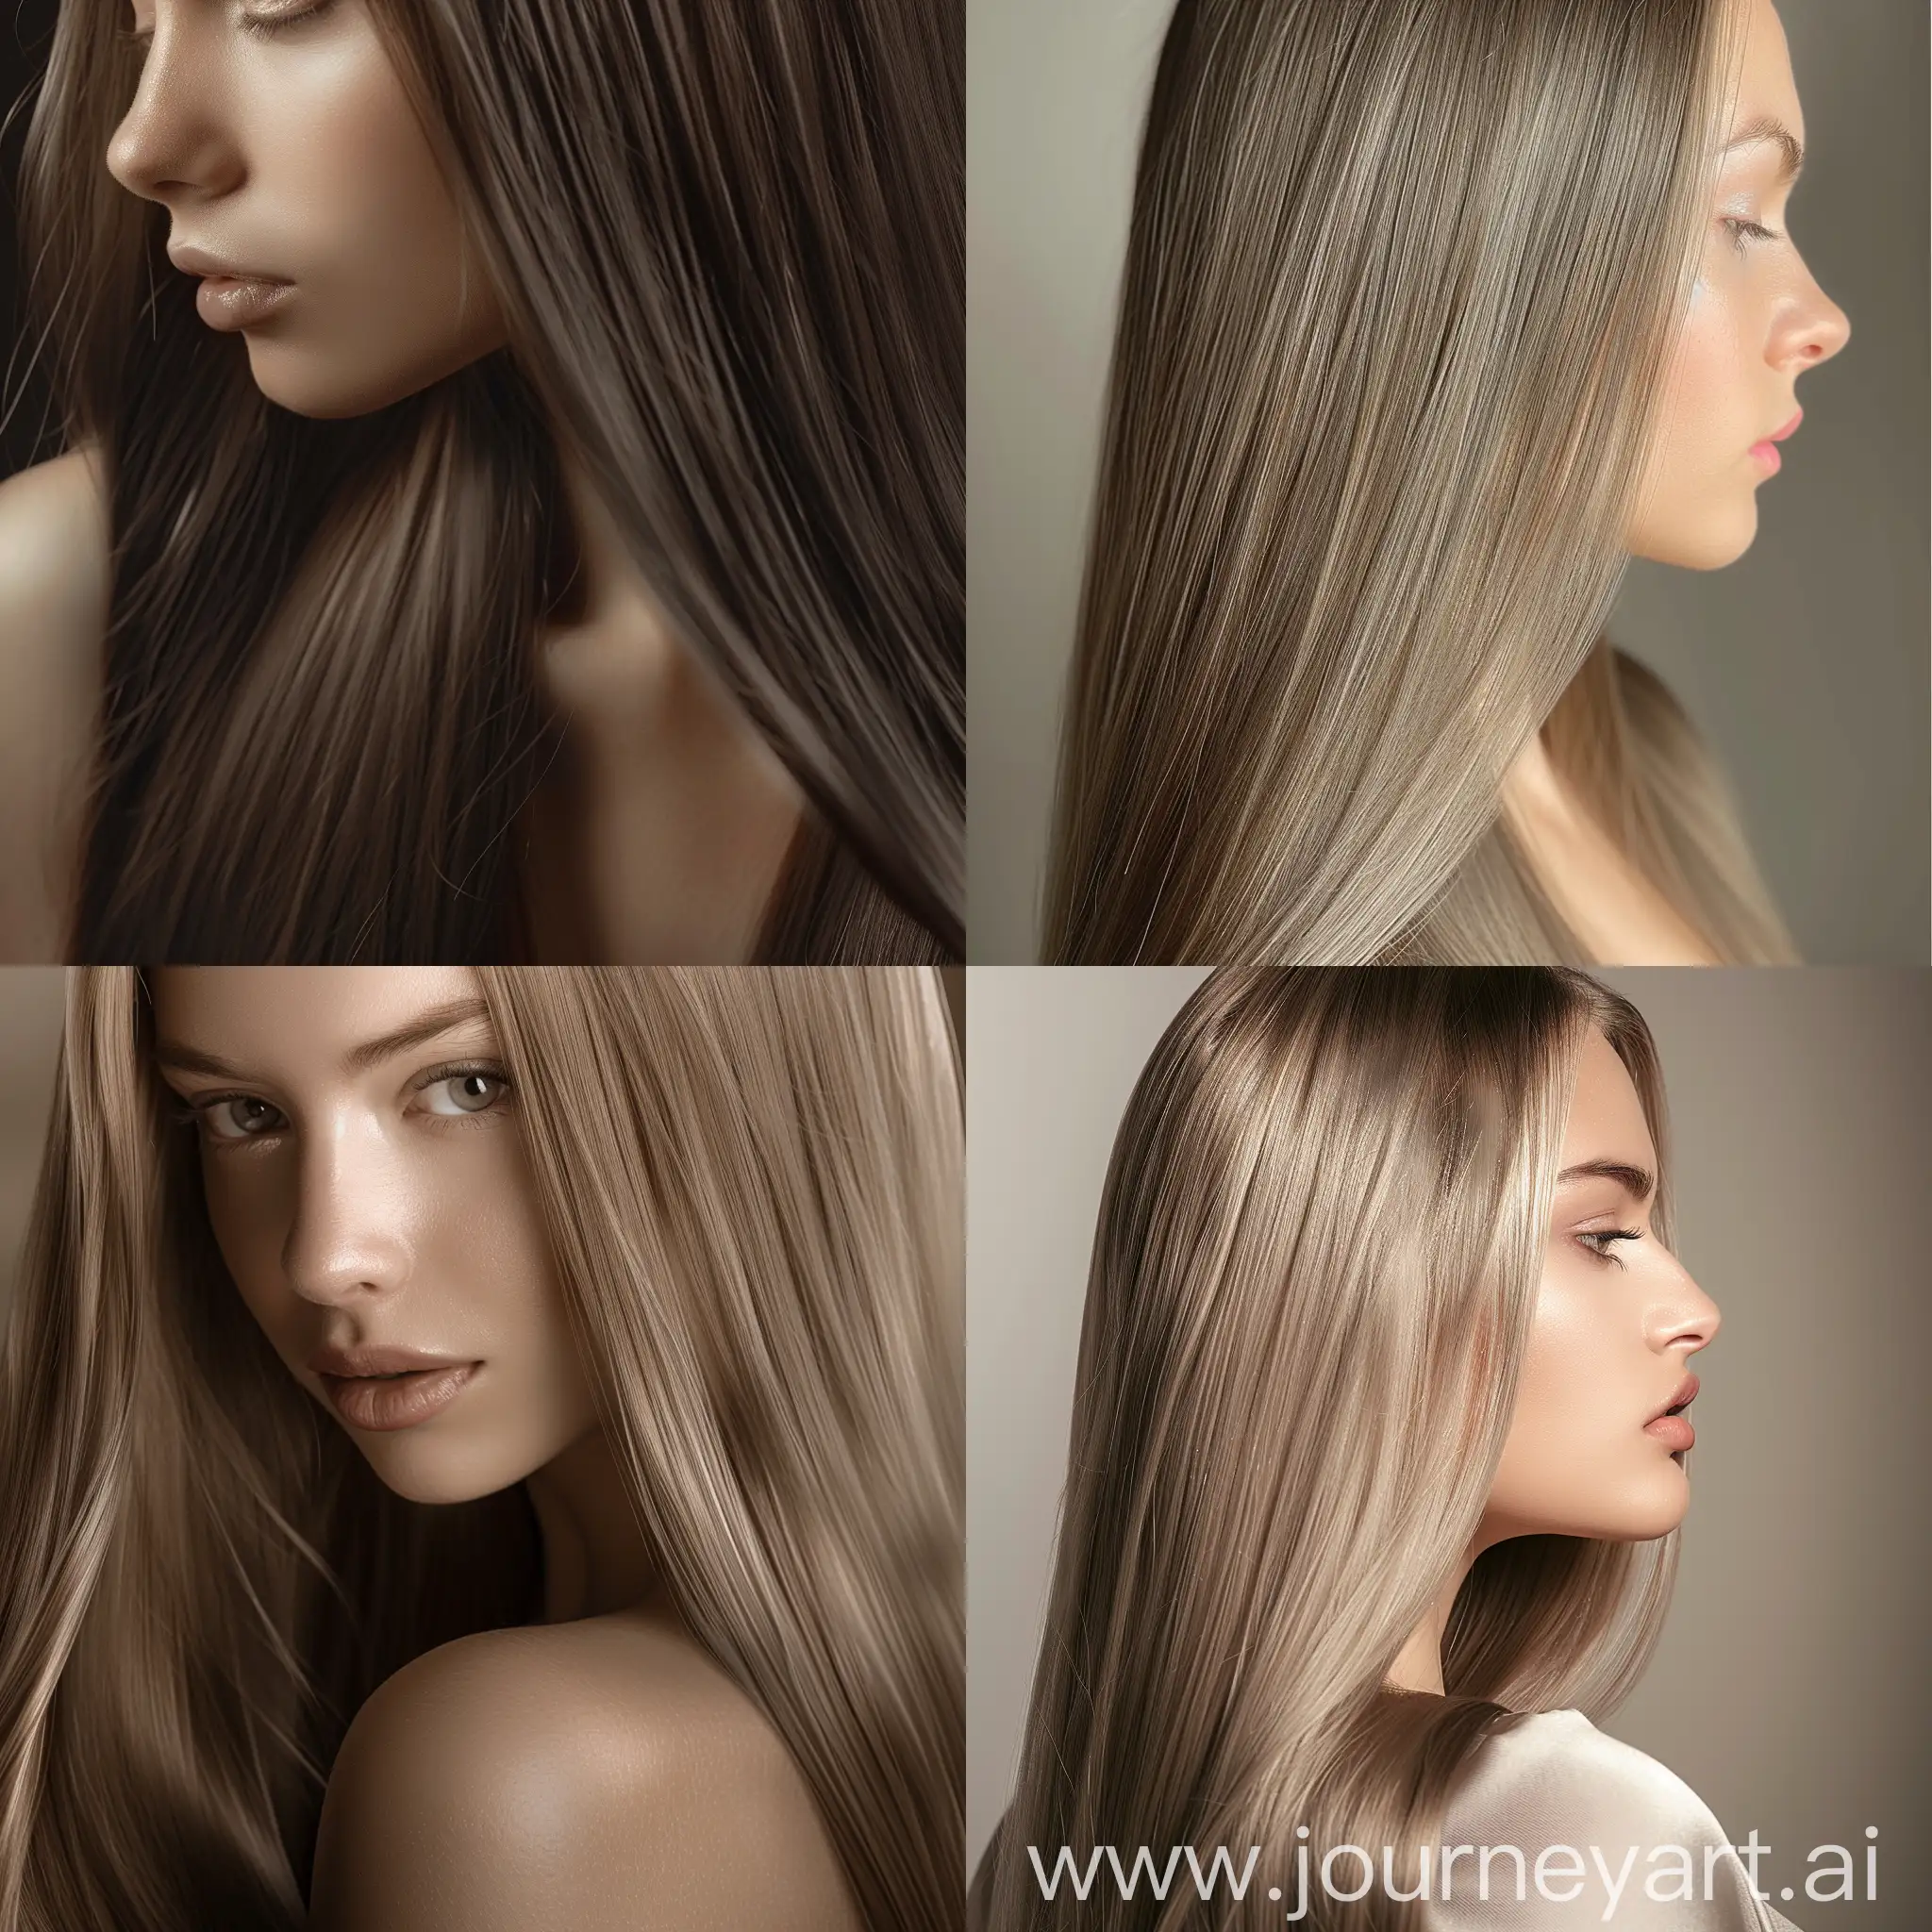 Elegant-Long-Straight-Hair-Portrait-Natural-Sheen-and-Texture